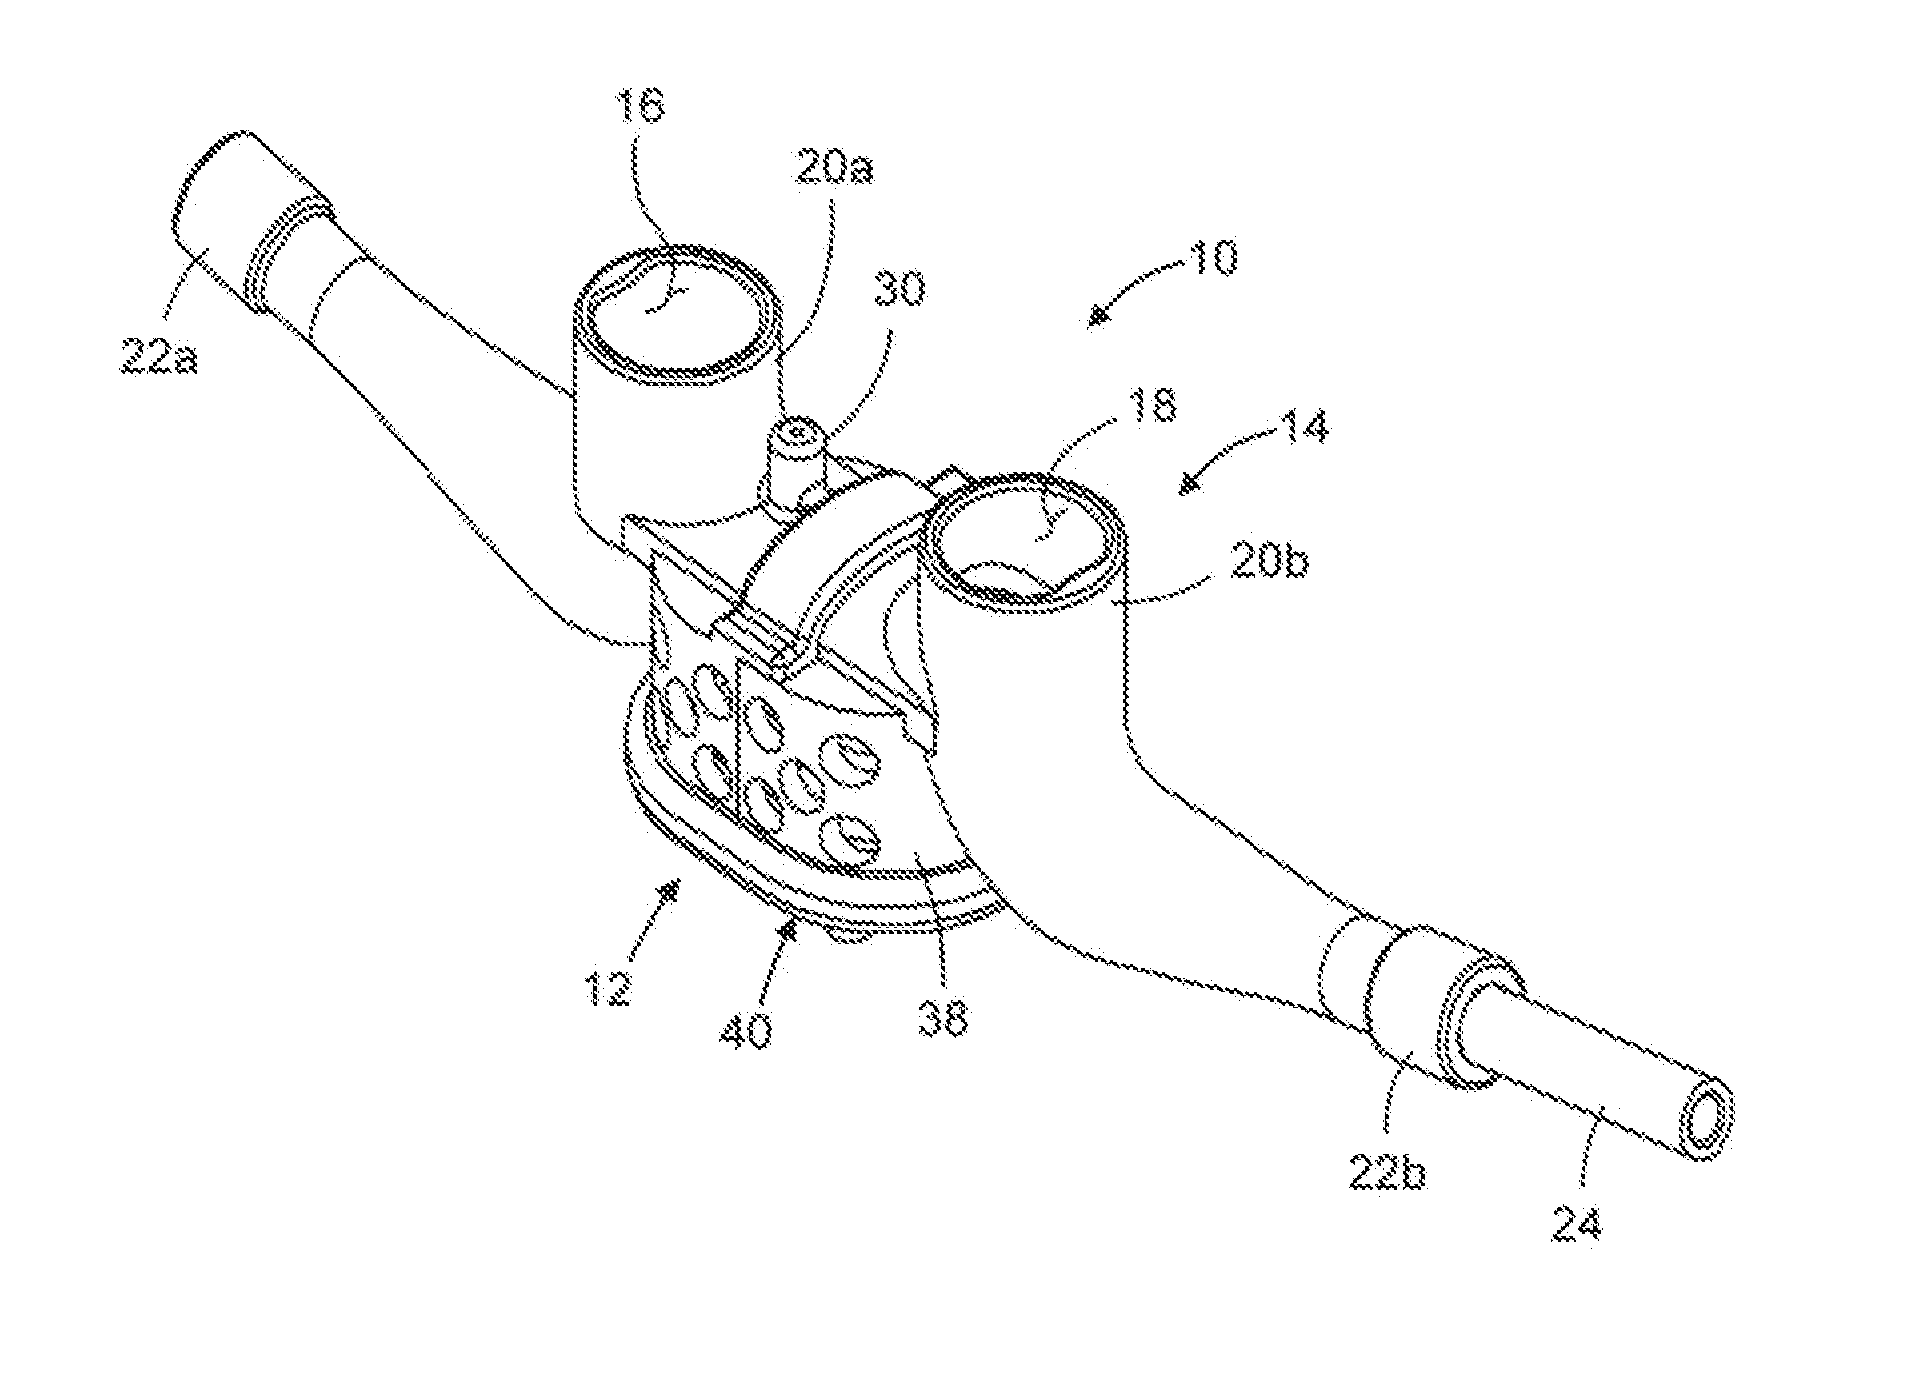 Ventilation mask with integrated piloted exhalation valve and method of ventilating a patient using the same